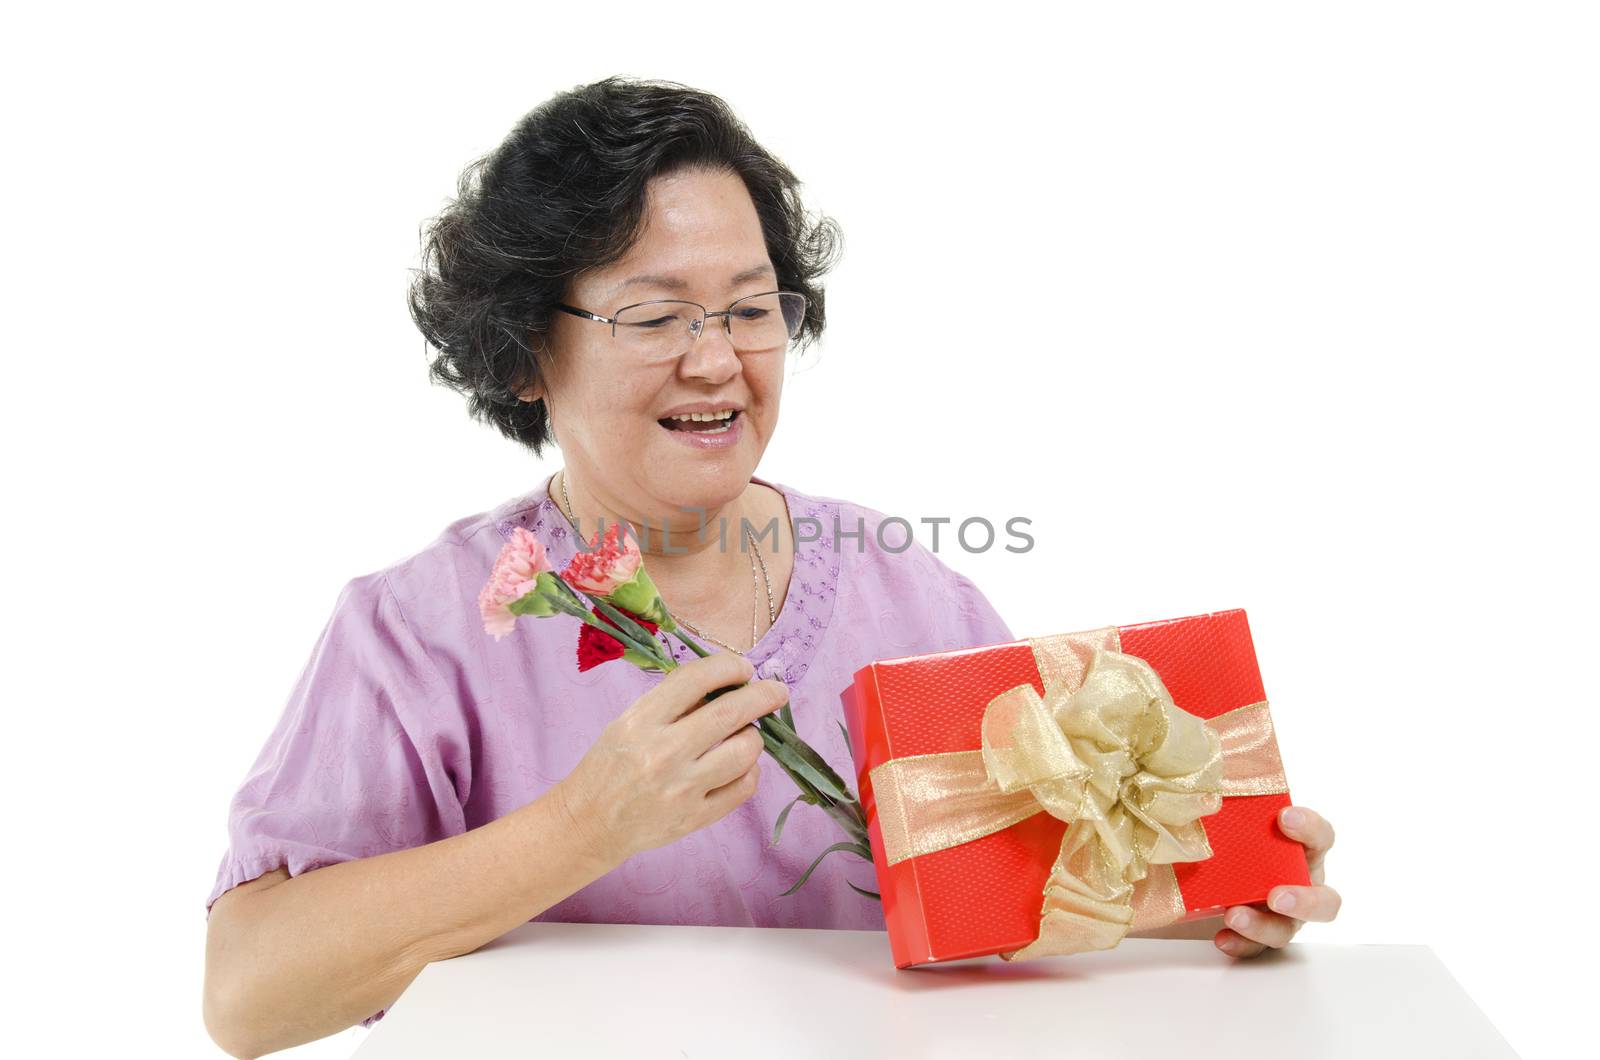 Happy mothers day concept. Portrait of 60s Asian senior adult woman receiving gift box and carnation flower from her child, isolated on white background.